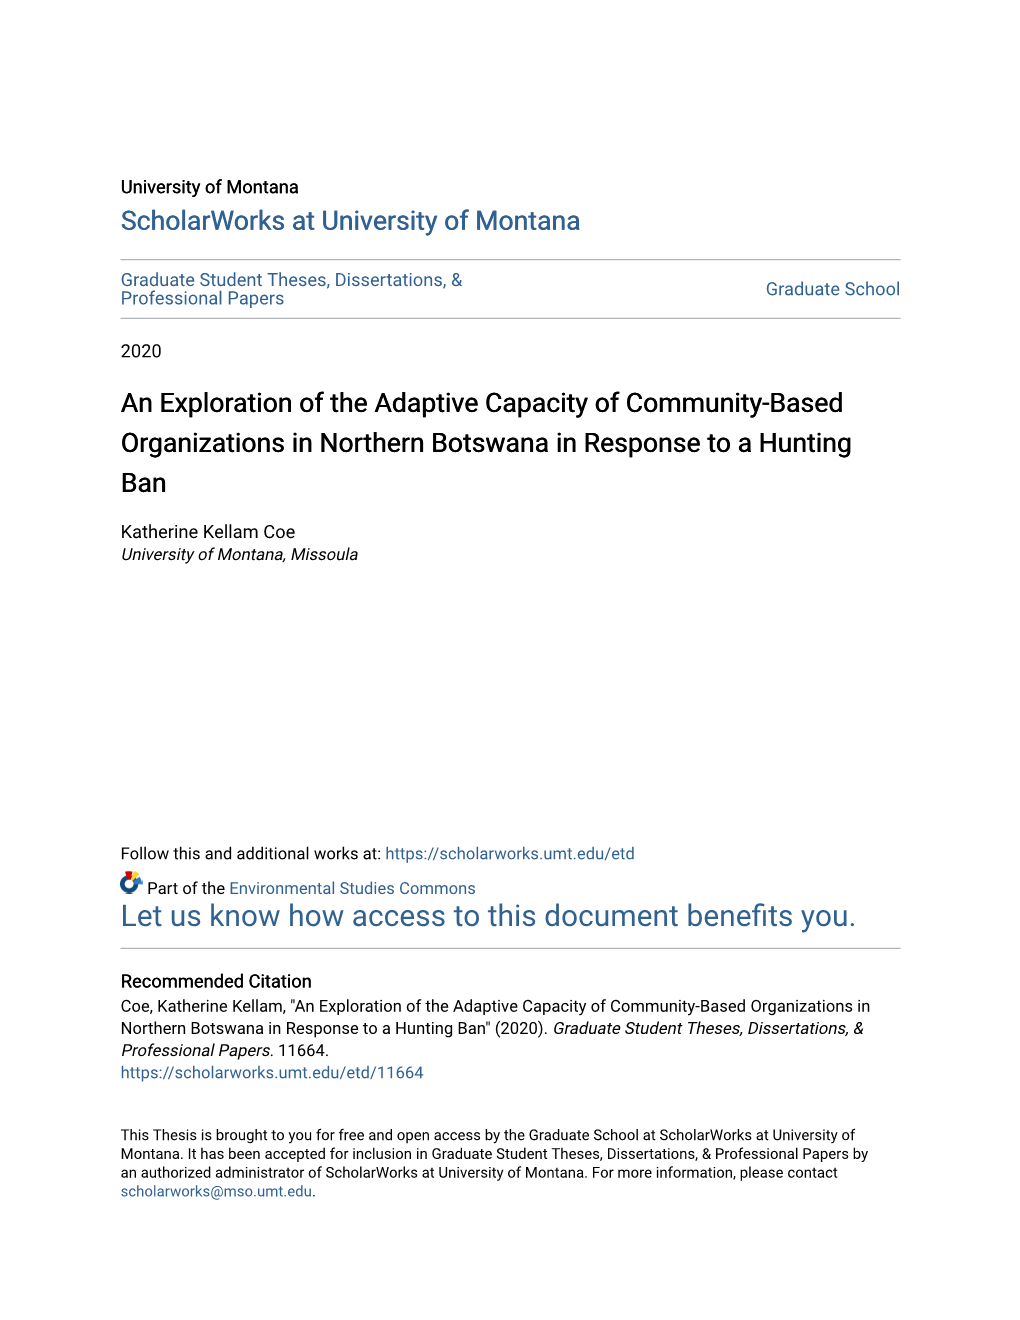 An Exploration of the Adaptive Capacity of Community-Based Organizations in Northern Botswana in Response to a Hunting Ban